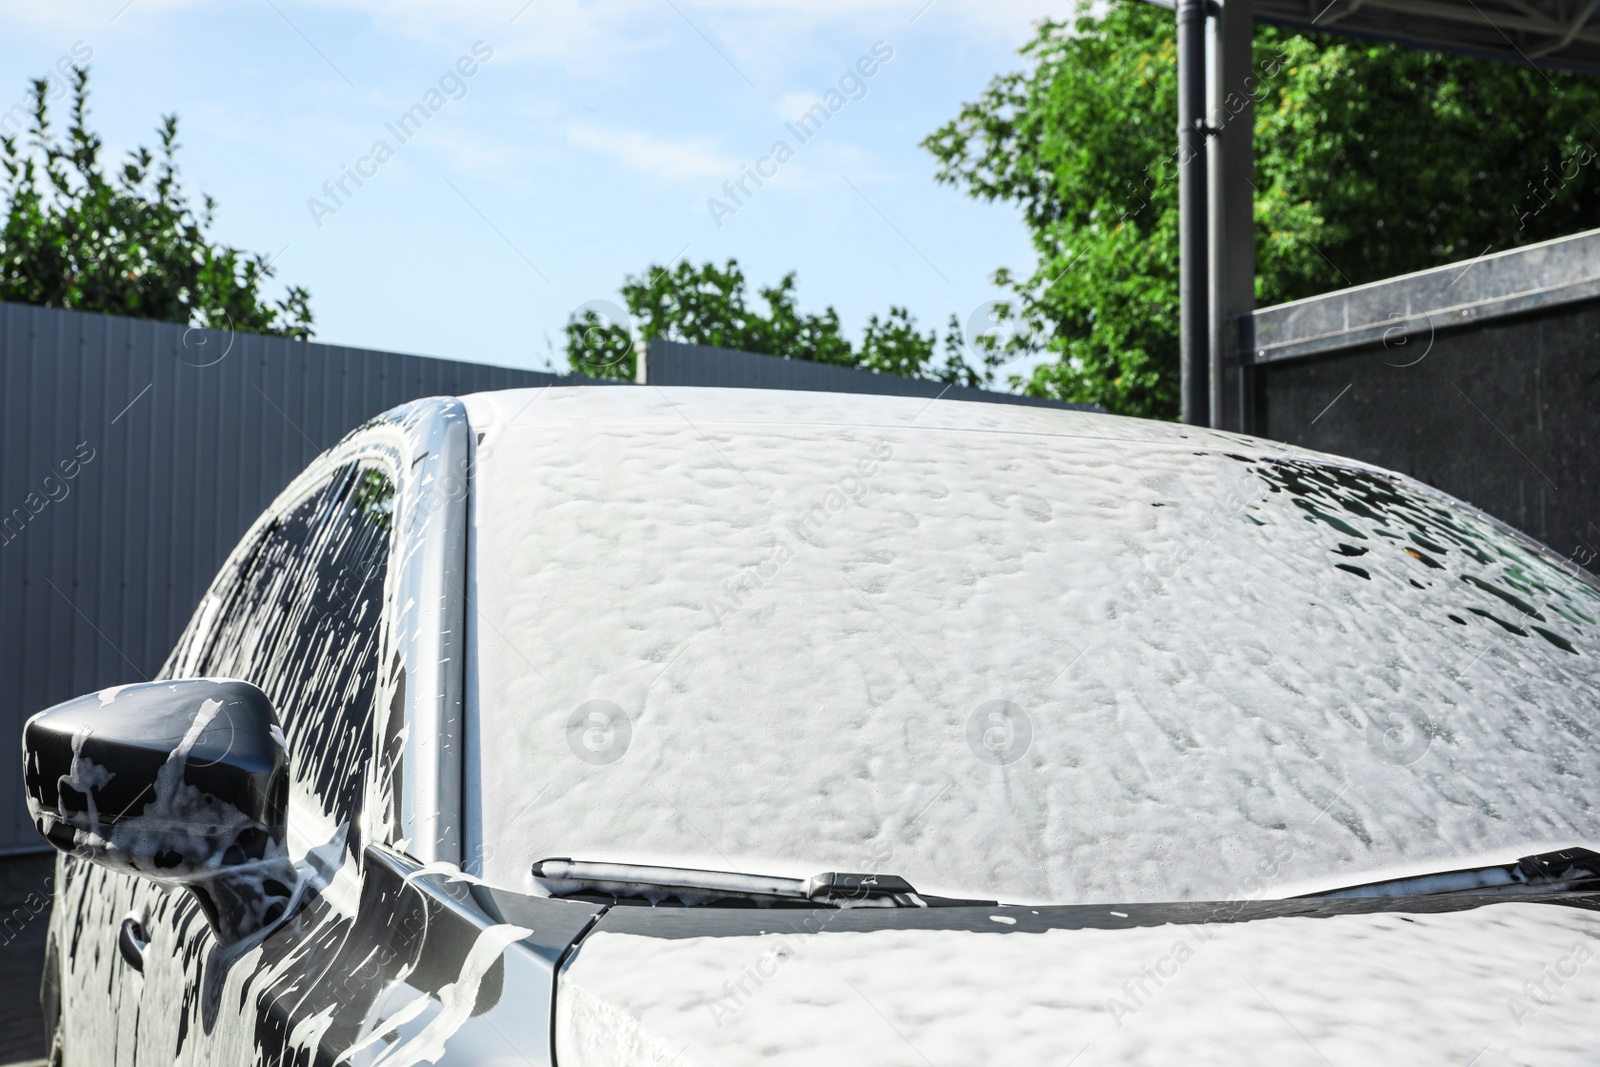 Photo of Automobile covered with foam at car wash, closeup of windshield